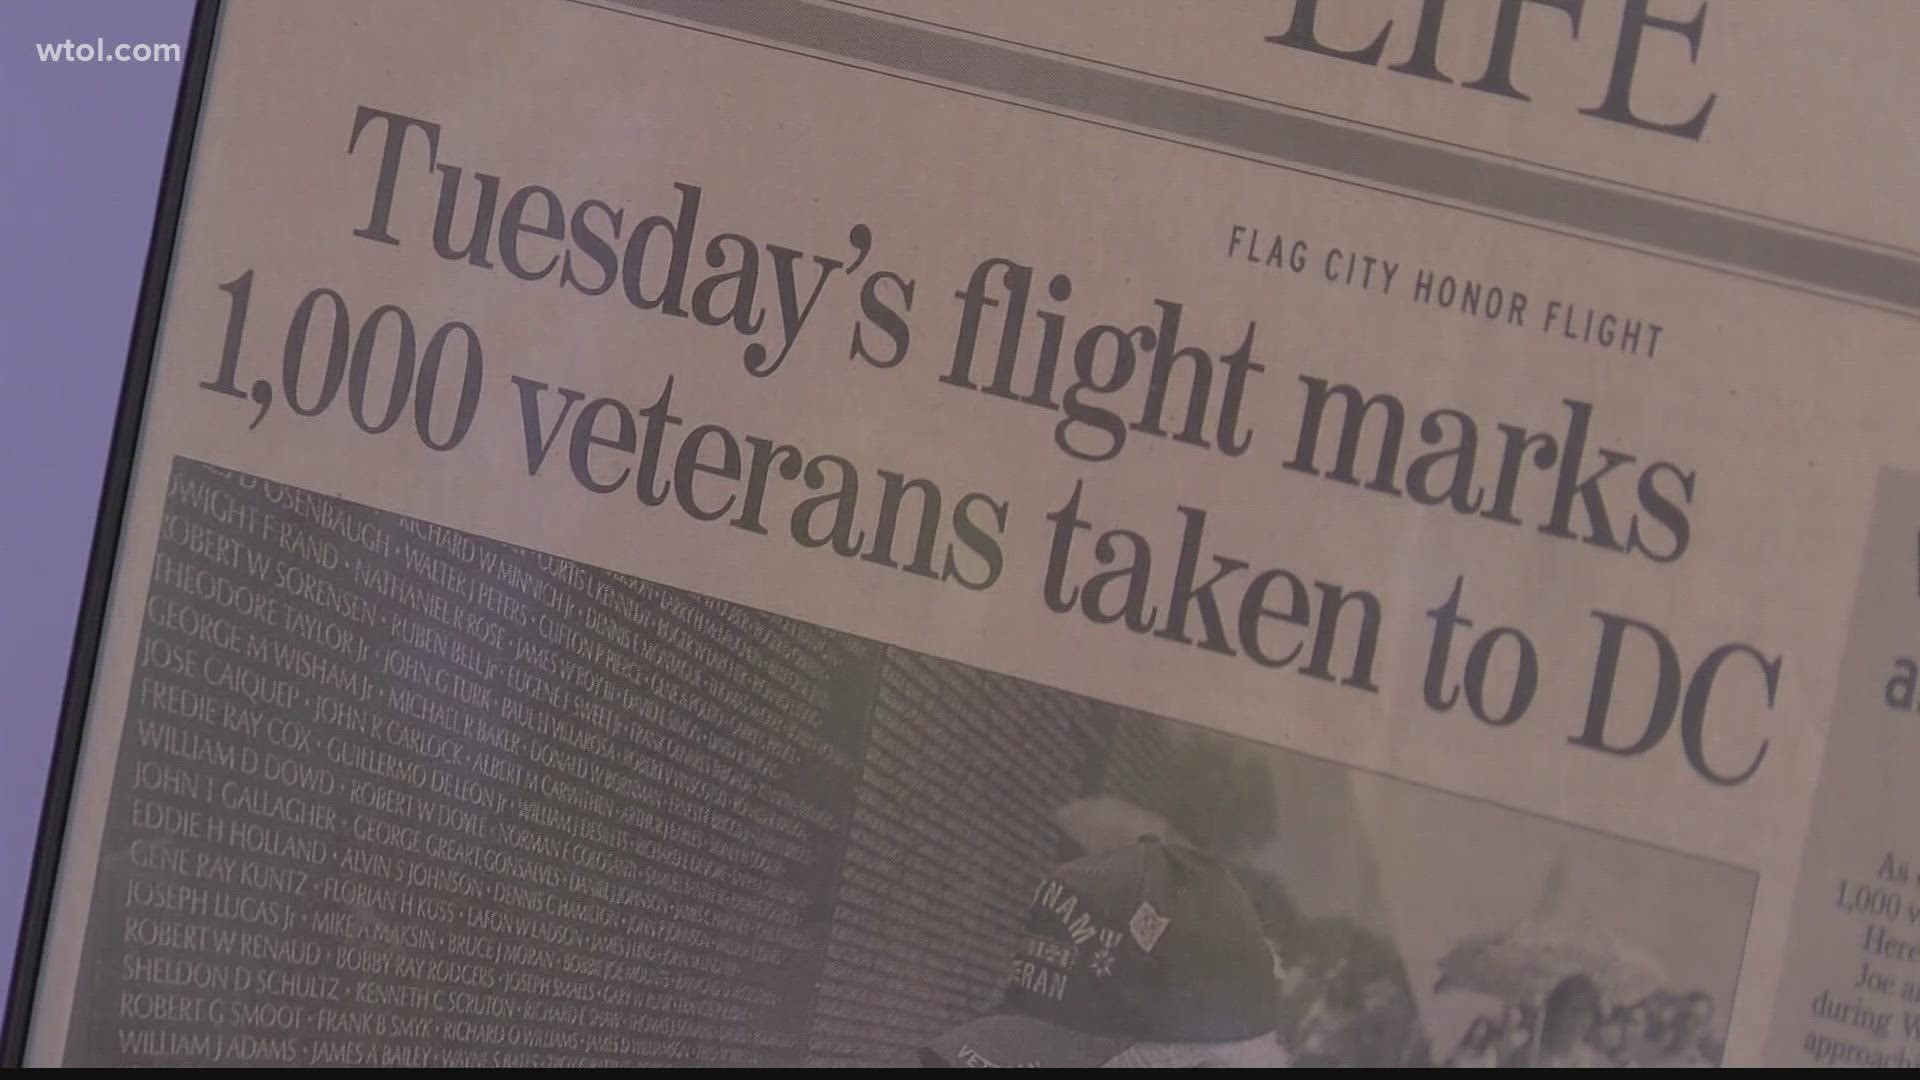 The Findlay chapter of Honor Flight has flown over 1,200 veterans to Washington D.C. since starting in 2010.